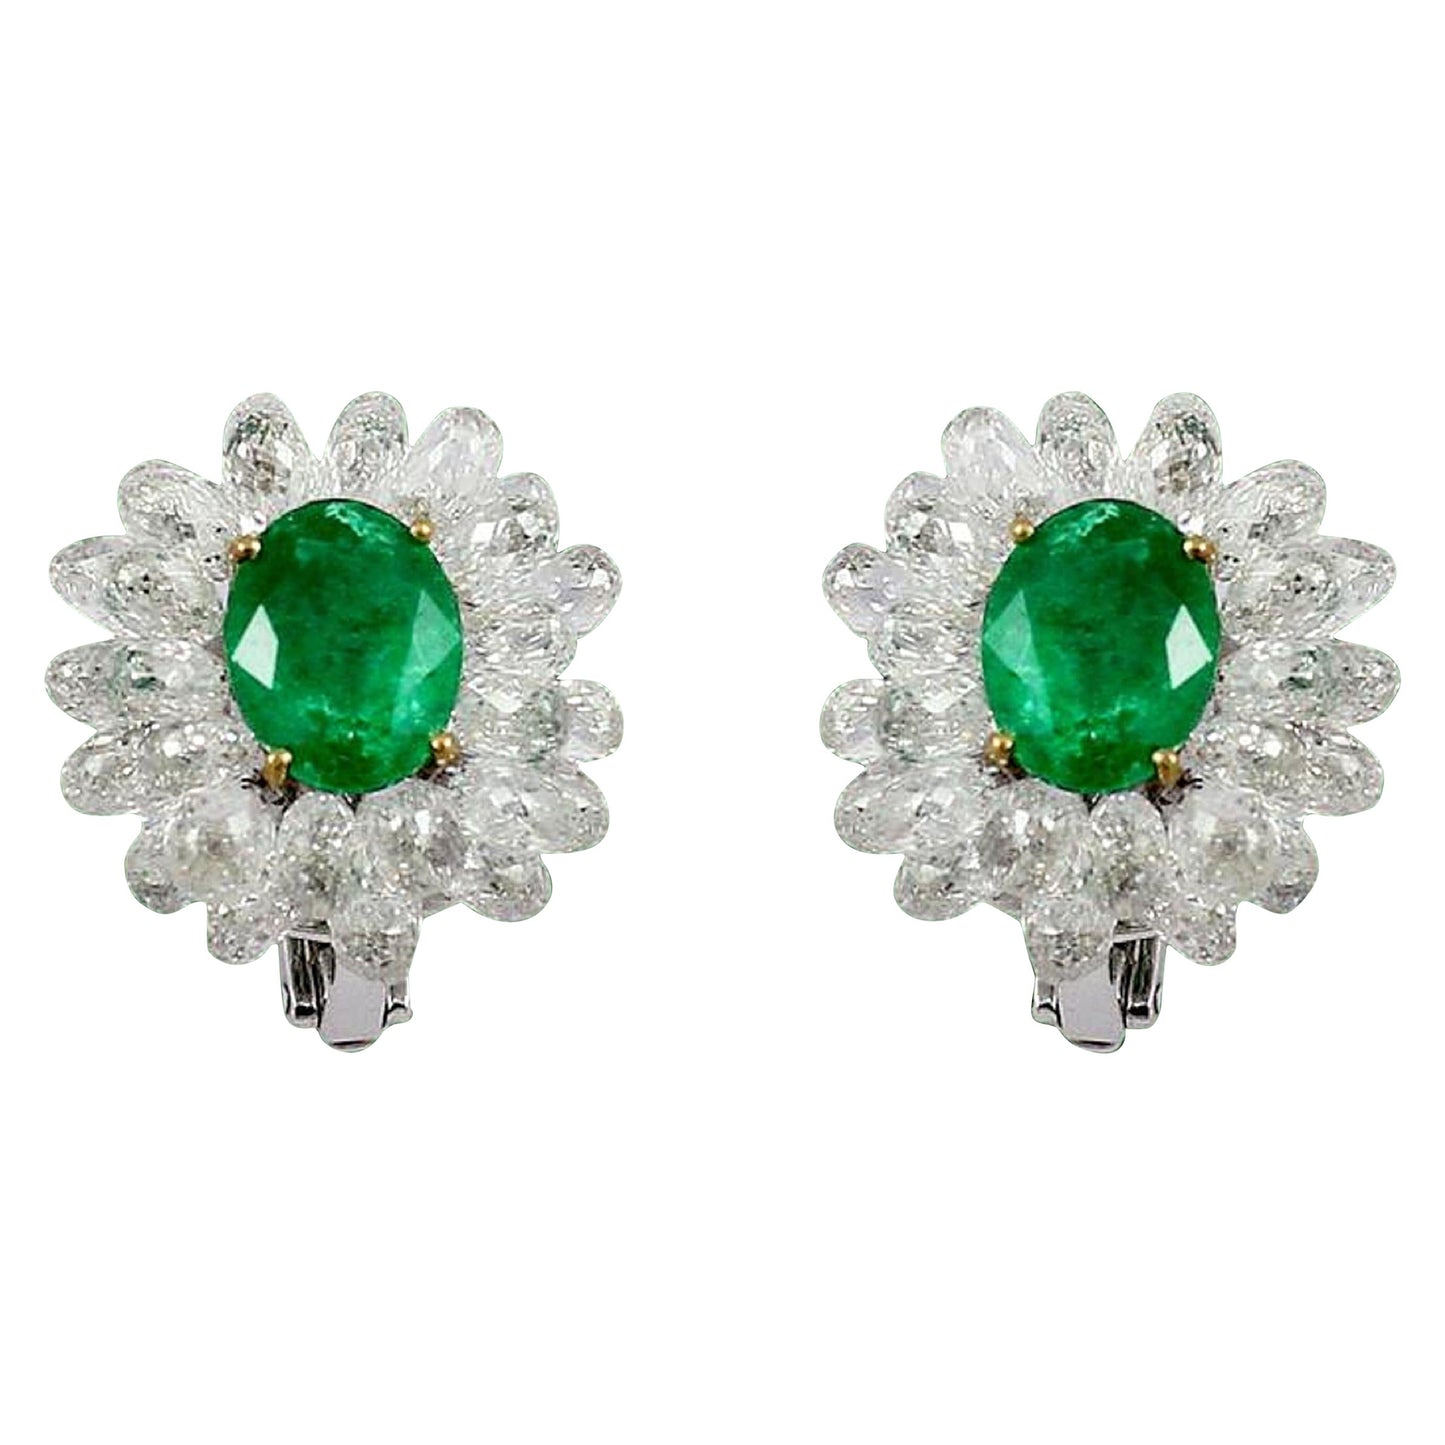 Diamond Briolette and Emerald Cluster Earrings,White Gold